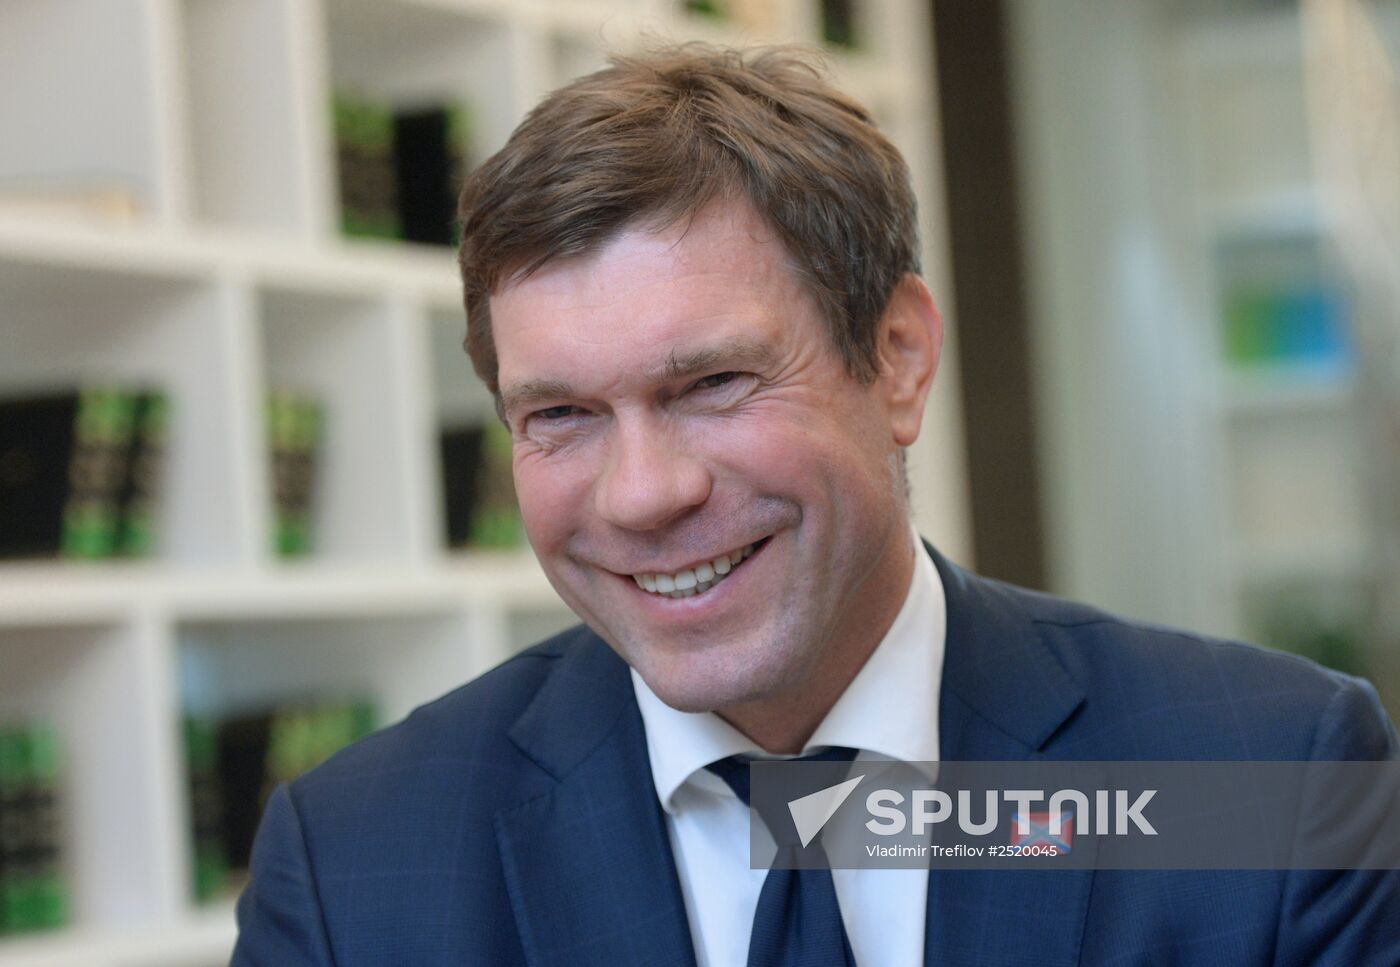 Oleg Tseryov gives interview in Moscow